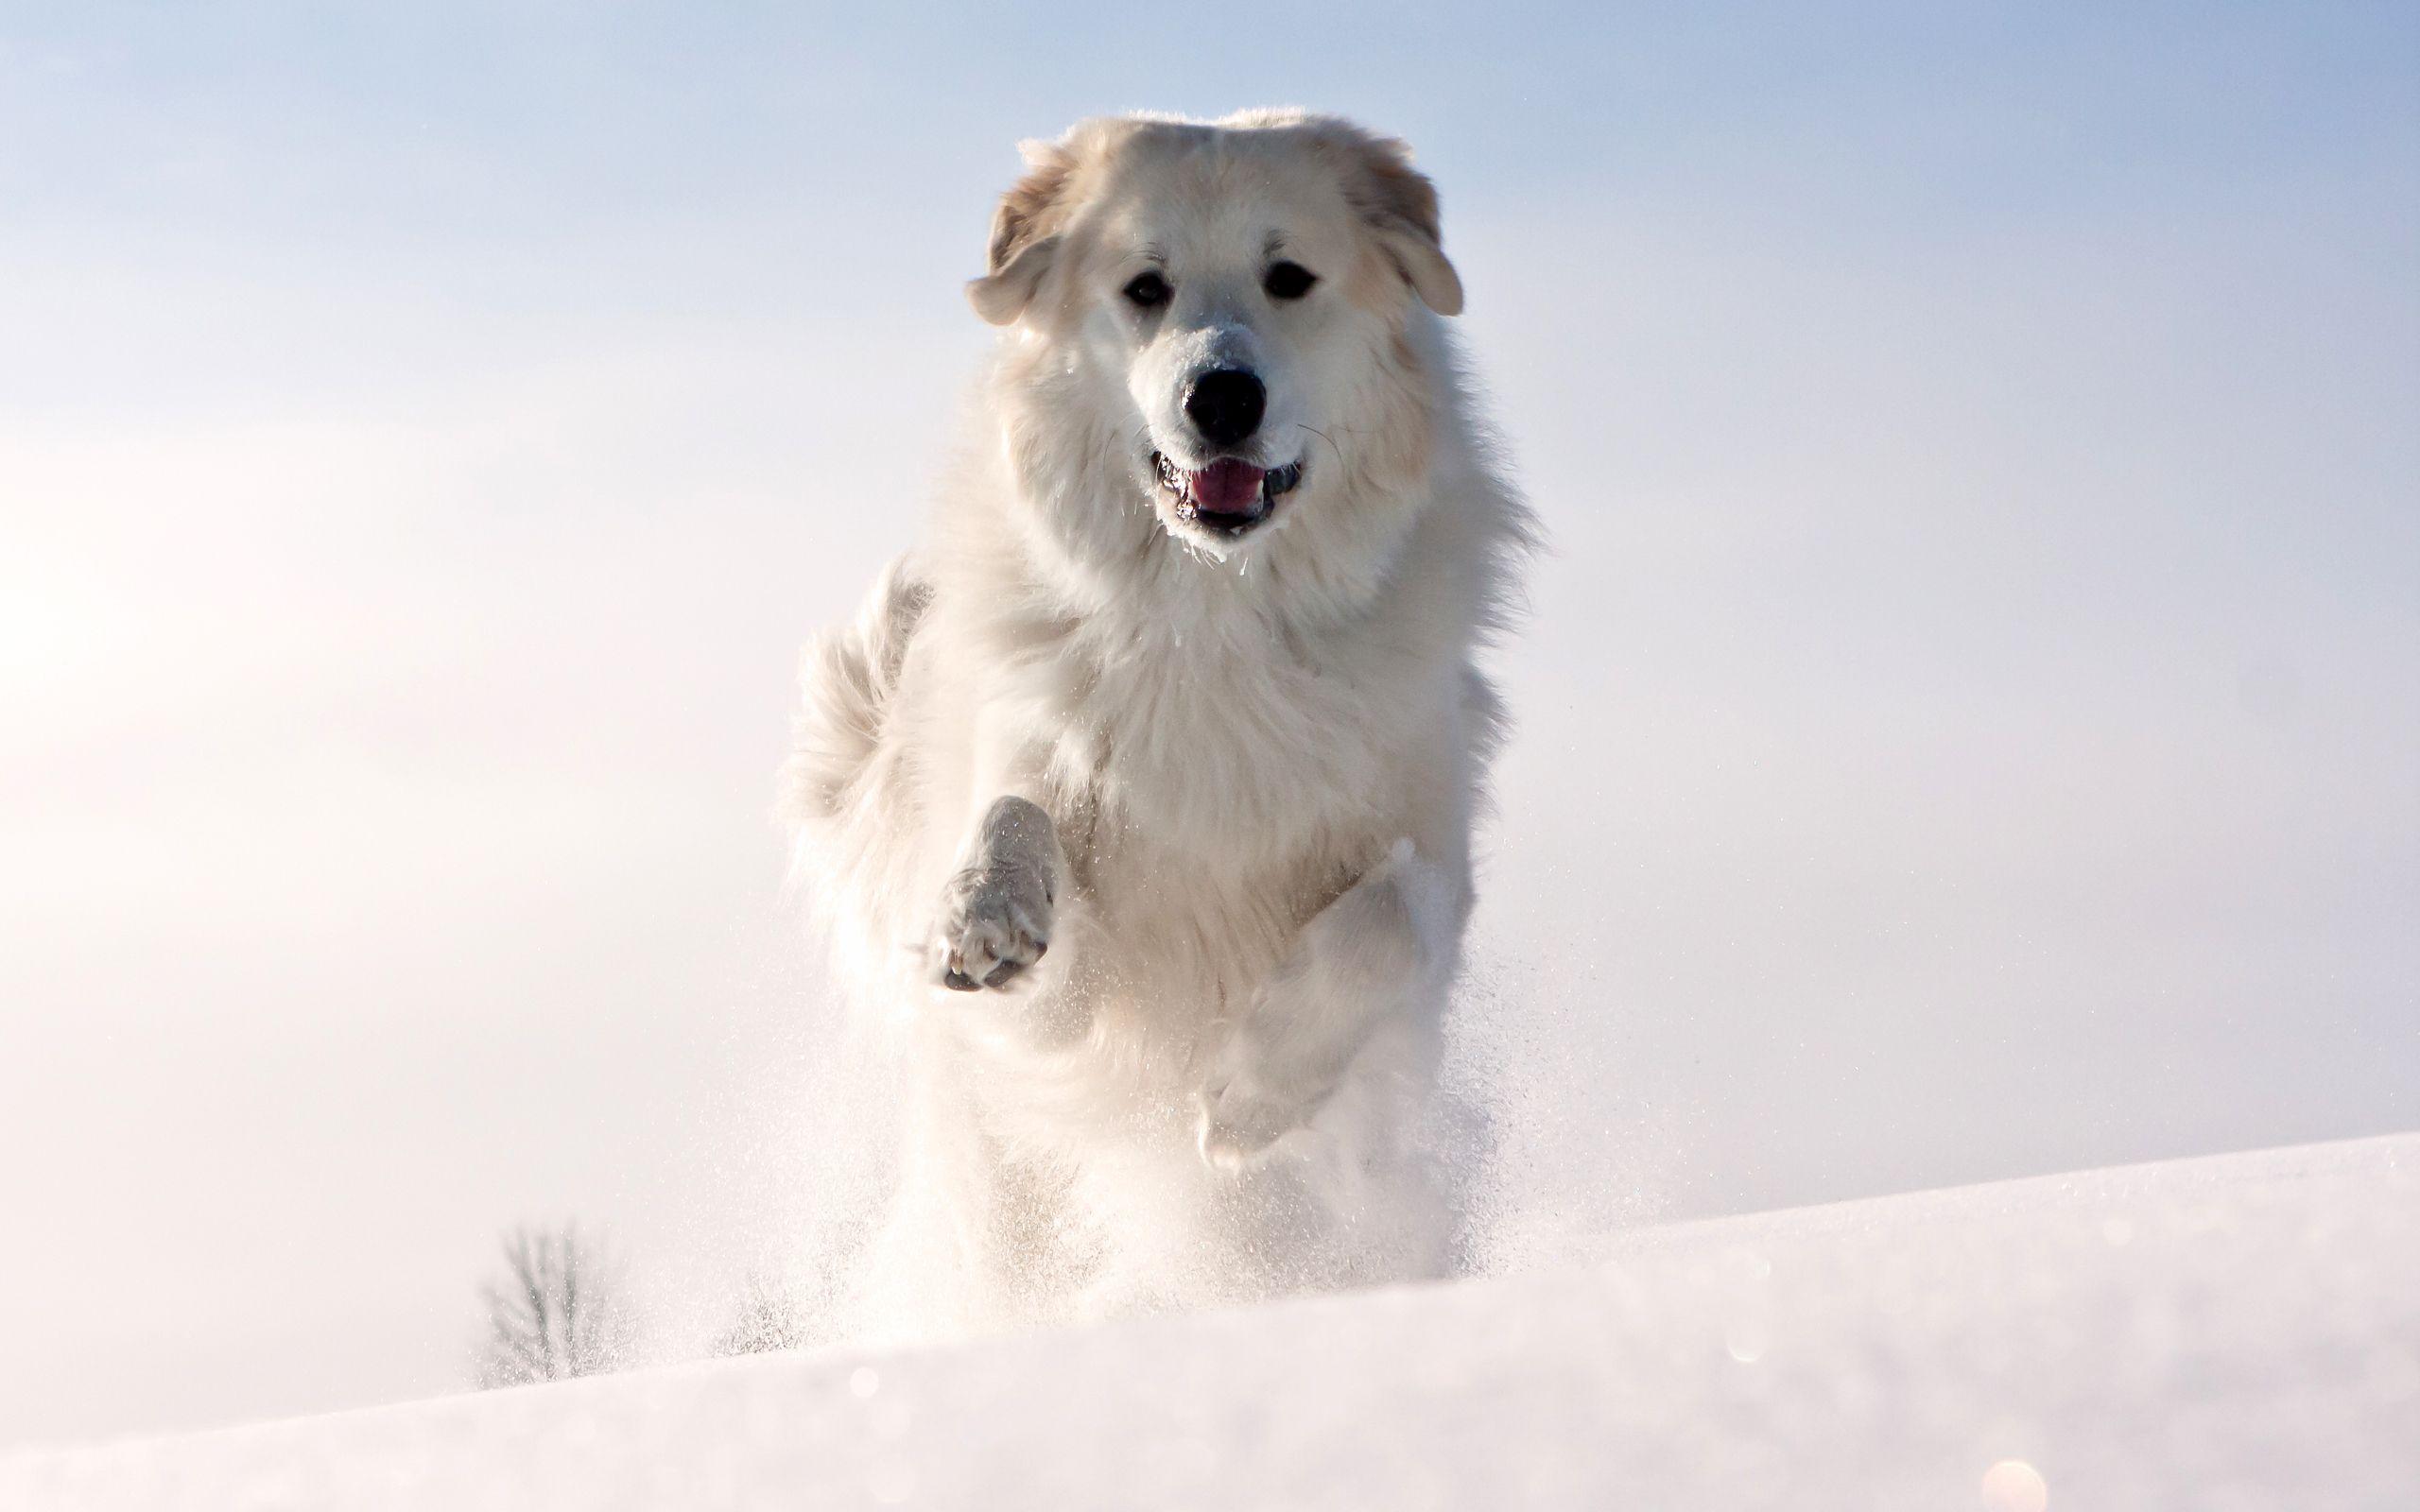 HD Snow Dog Wallpaper. Download Free -112104. Snow dogs, Dogs, Dog background